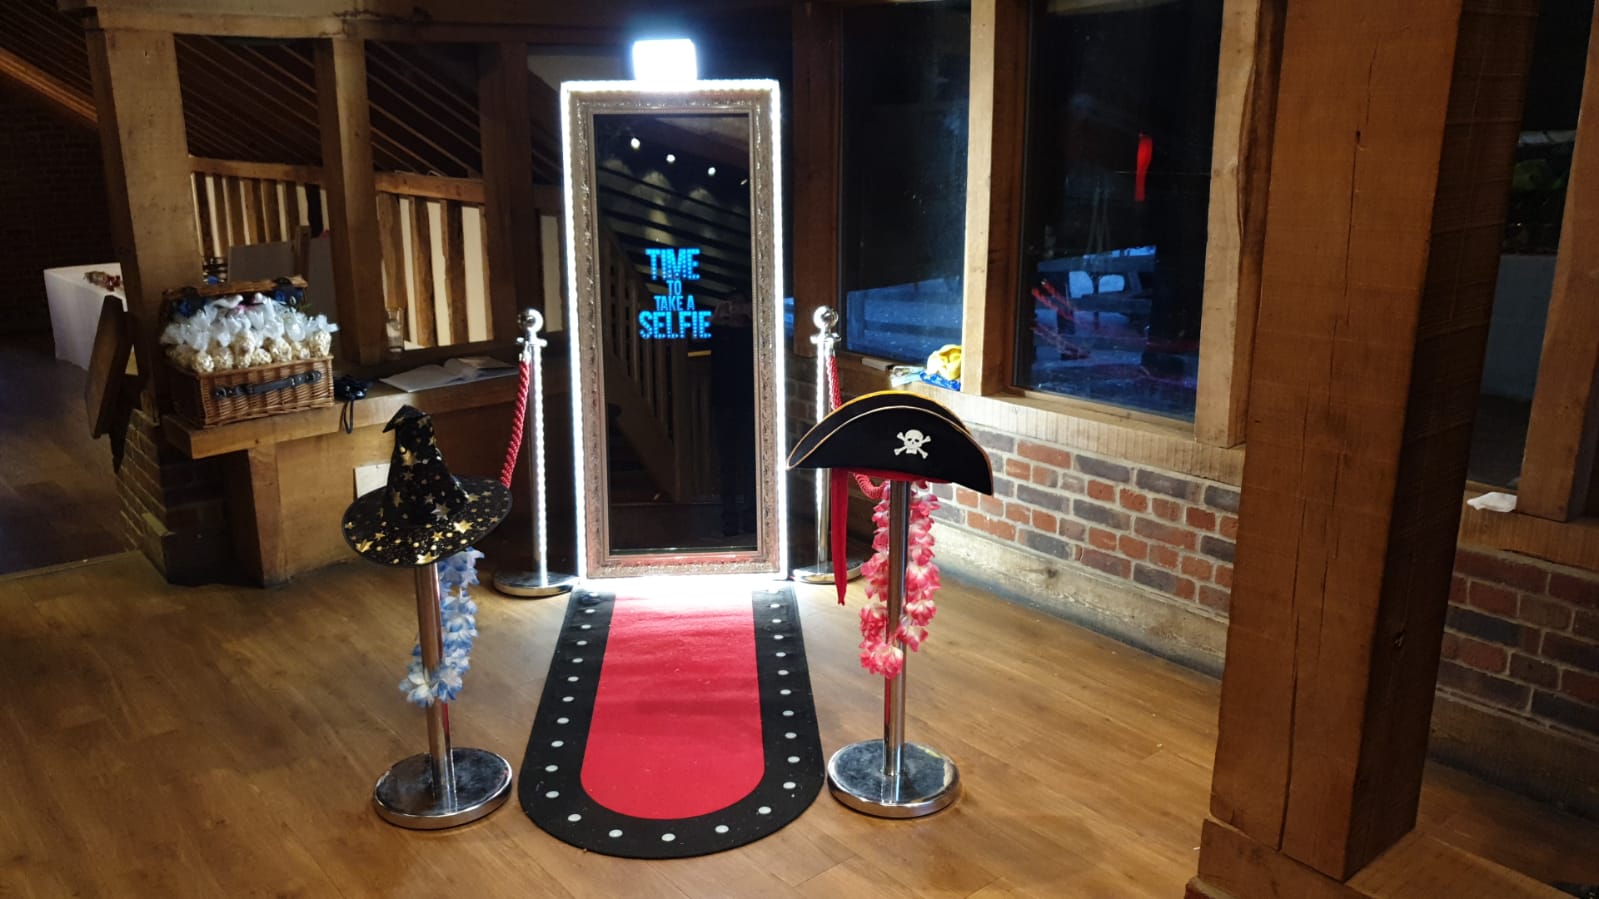 Take Home Entertaining Memories with a Magic Mirror Photo Booth!